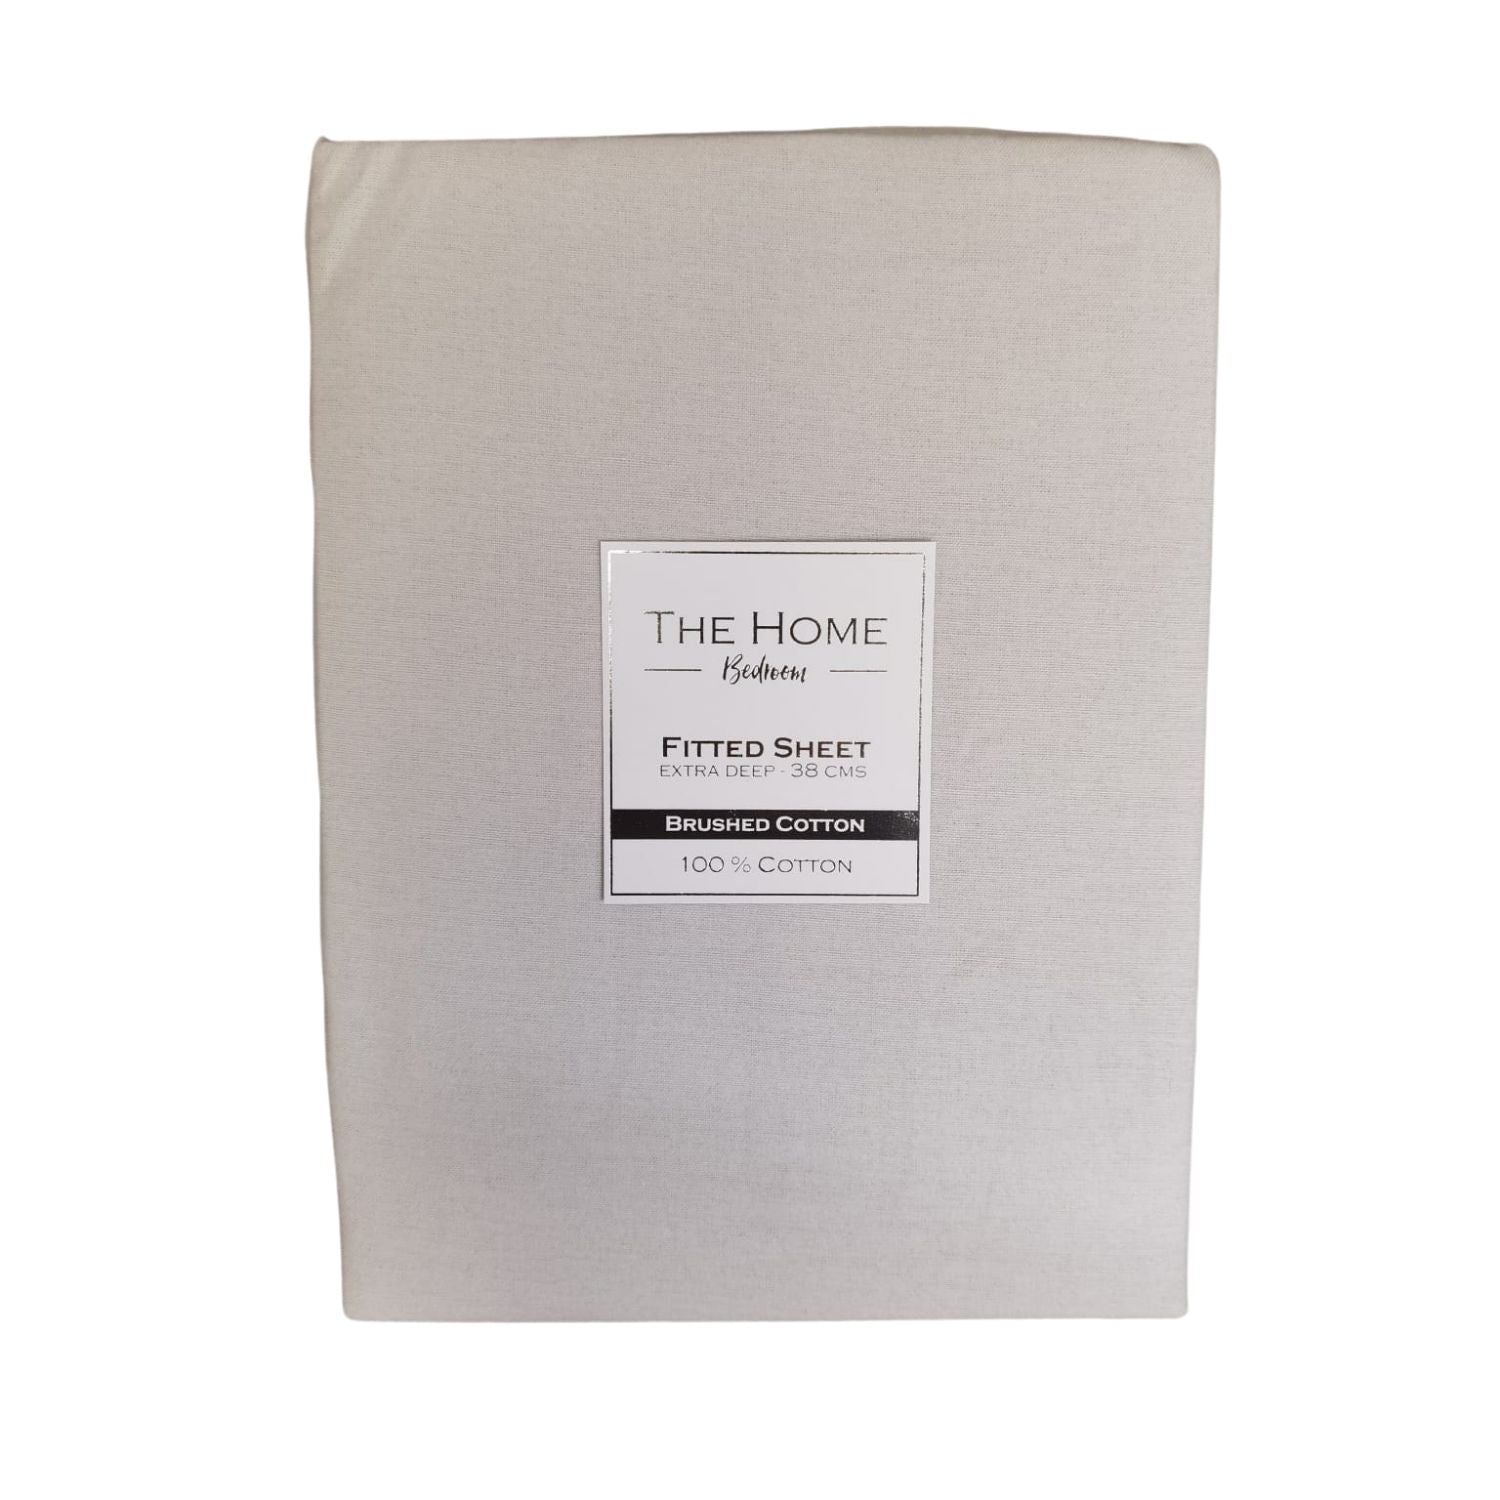 The Home Bedroom 100% Brushed Cotton Fitted Sheet - Grey 1 Shaws Department Stores